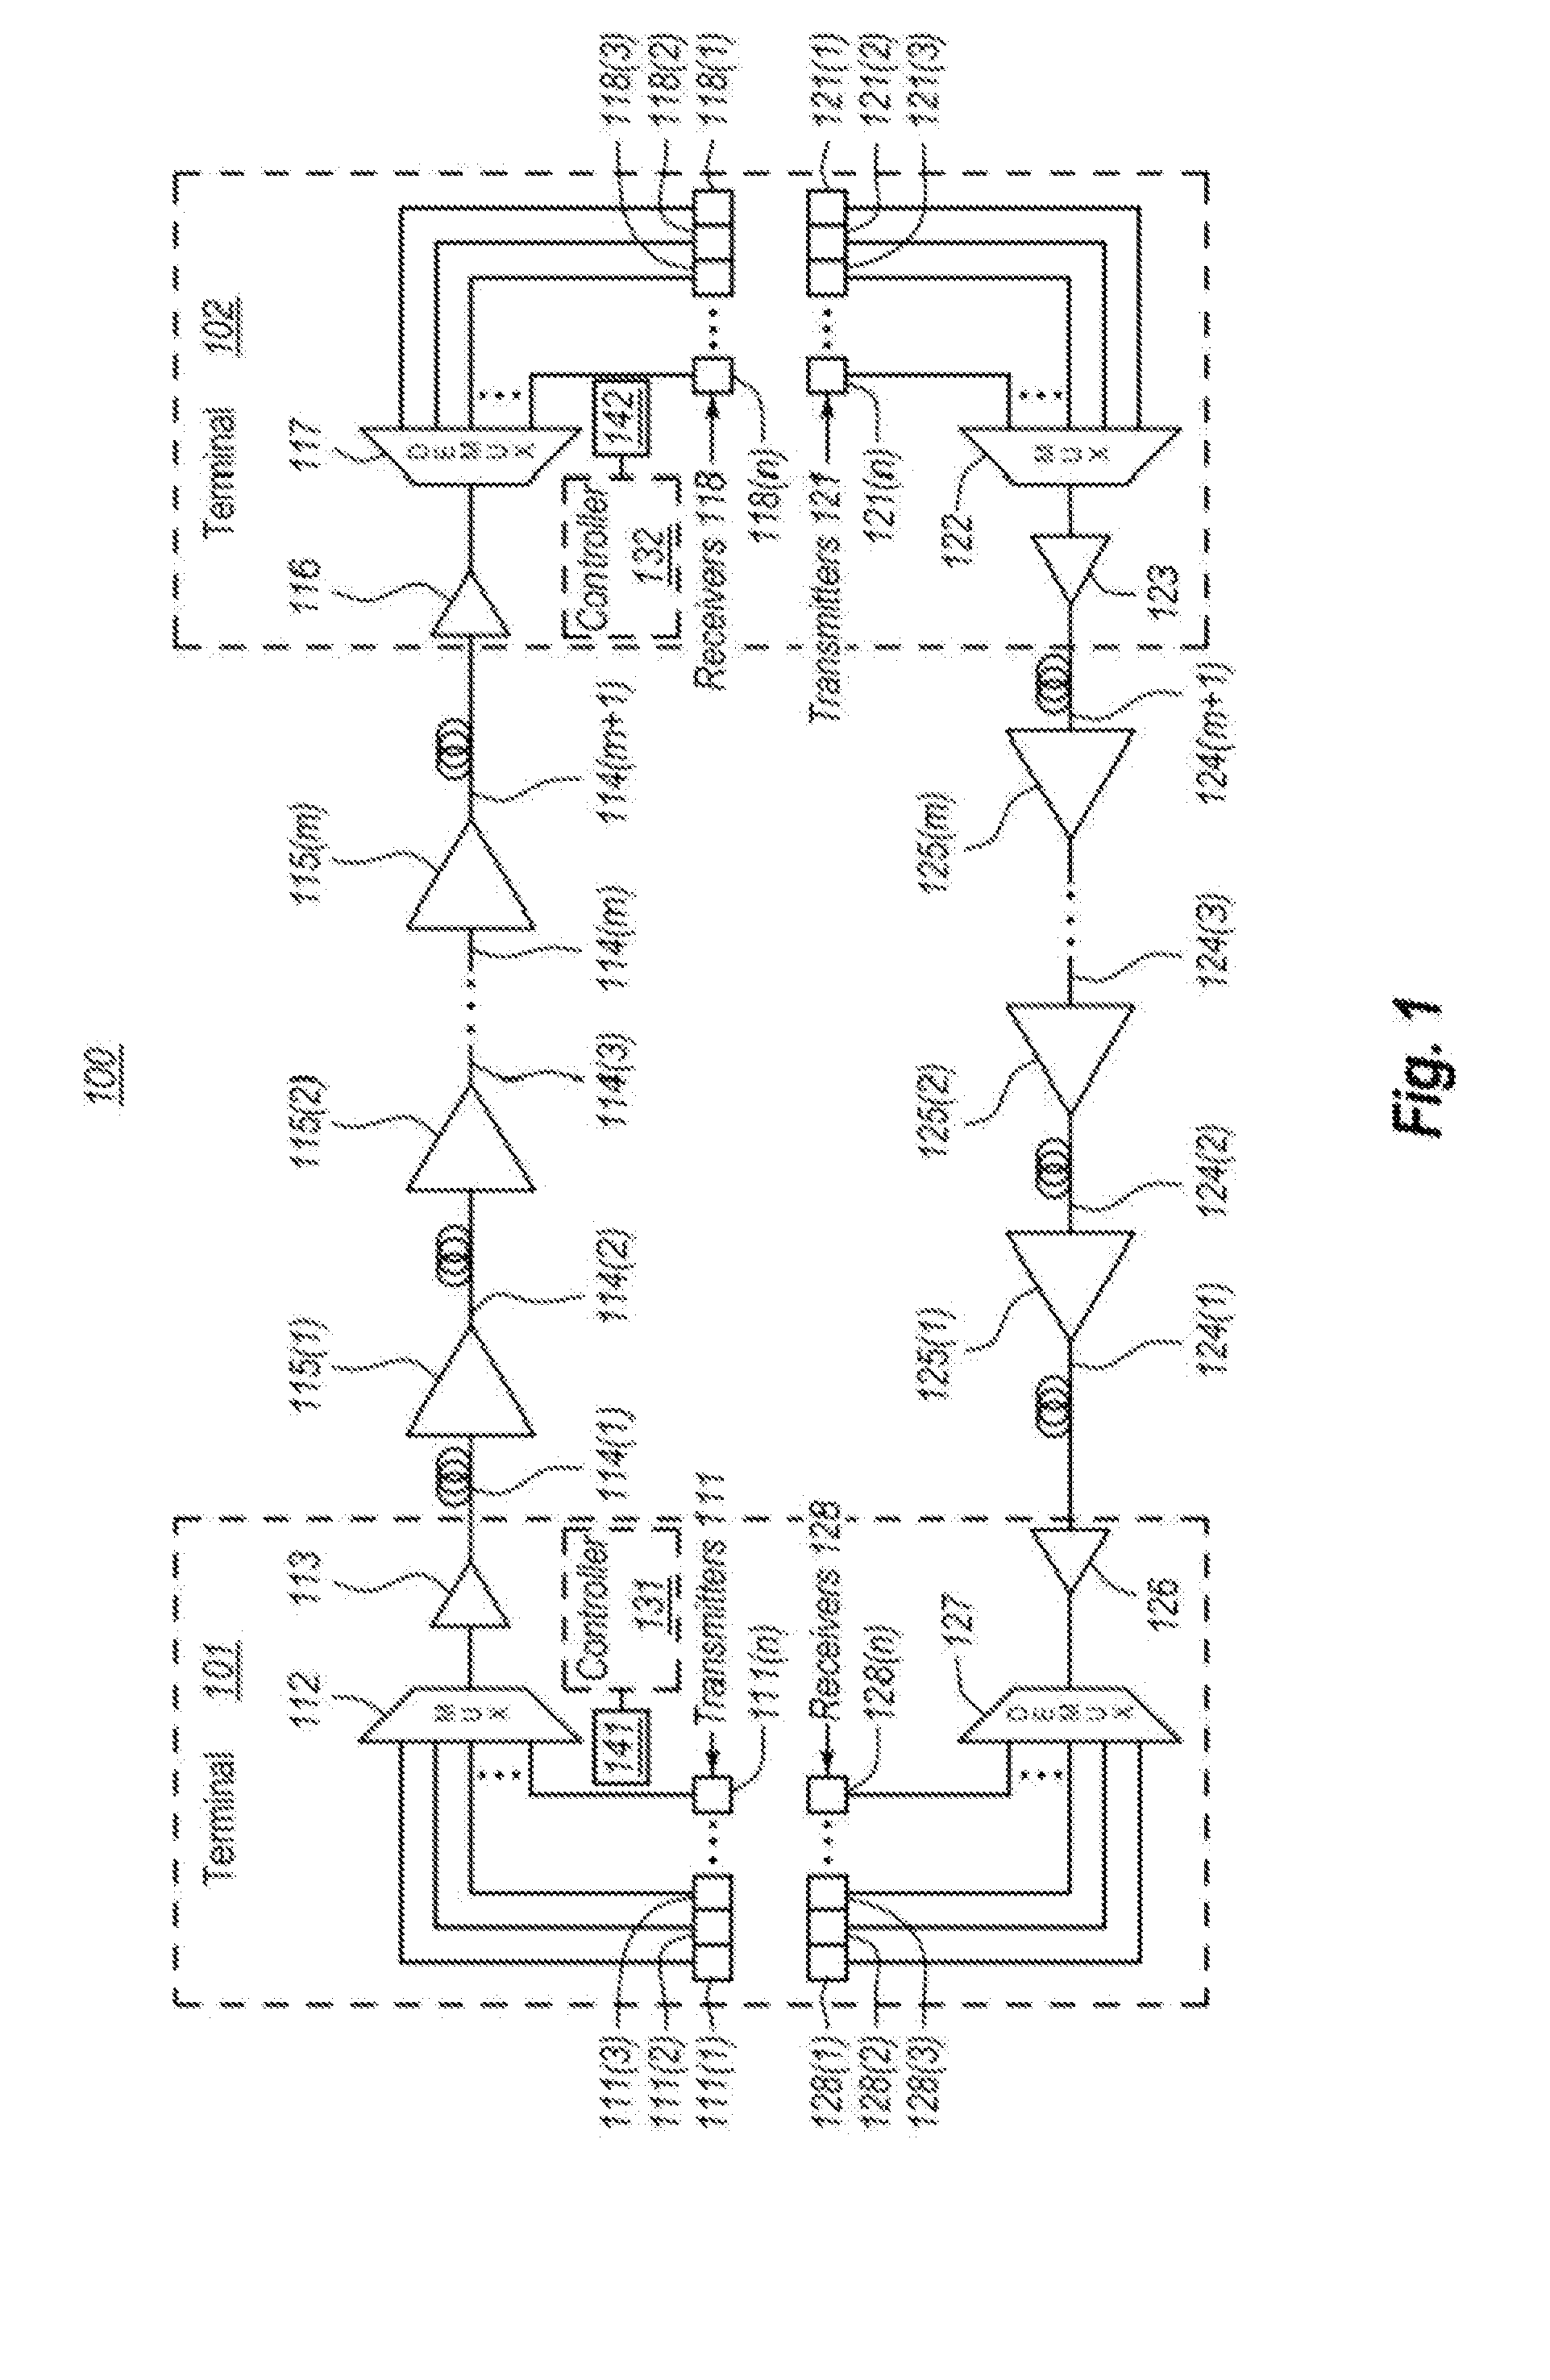 System control of repeatered optical communications system